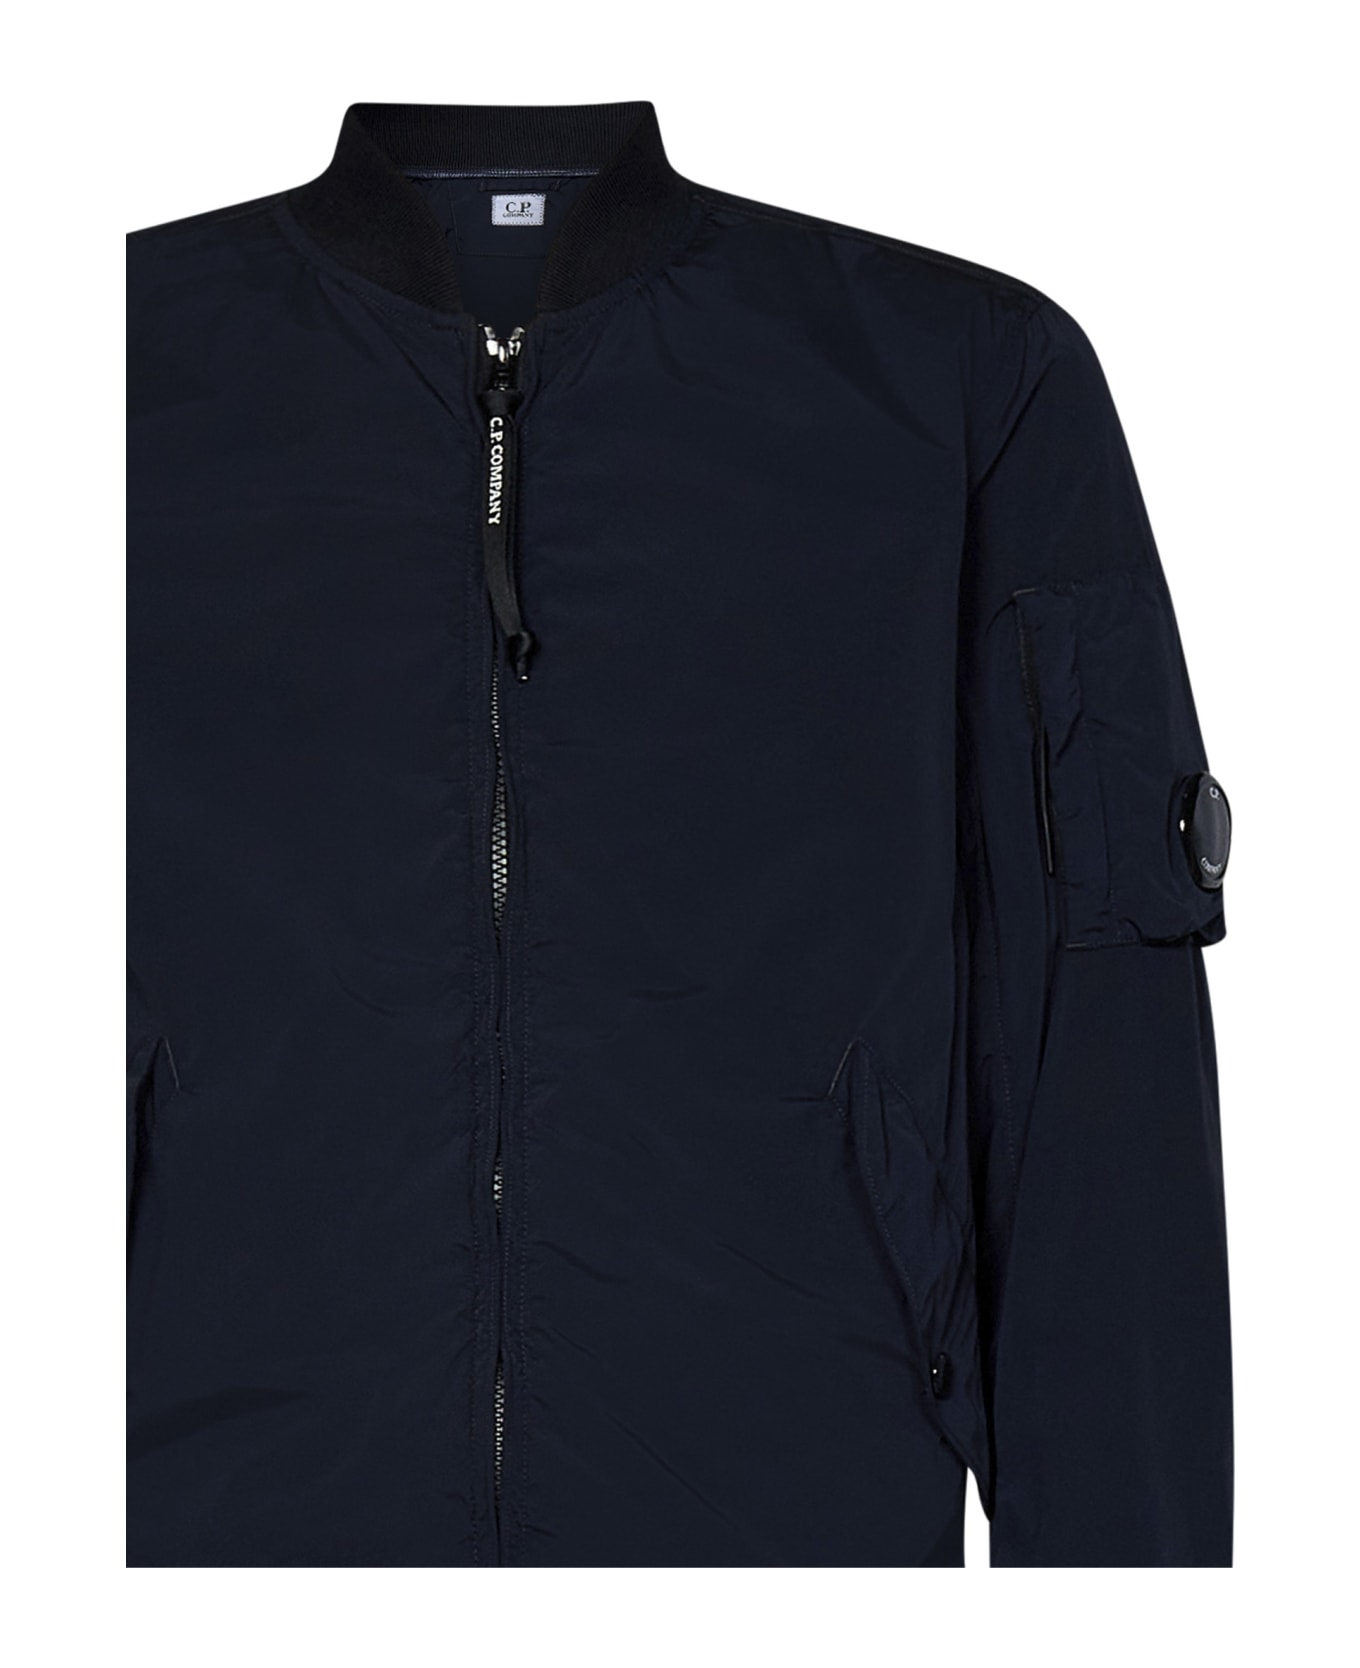 C.P. Company Nycra-r Bomber Jacket - Totale Eclipse